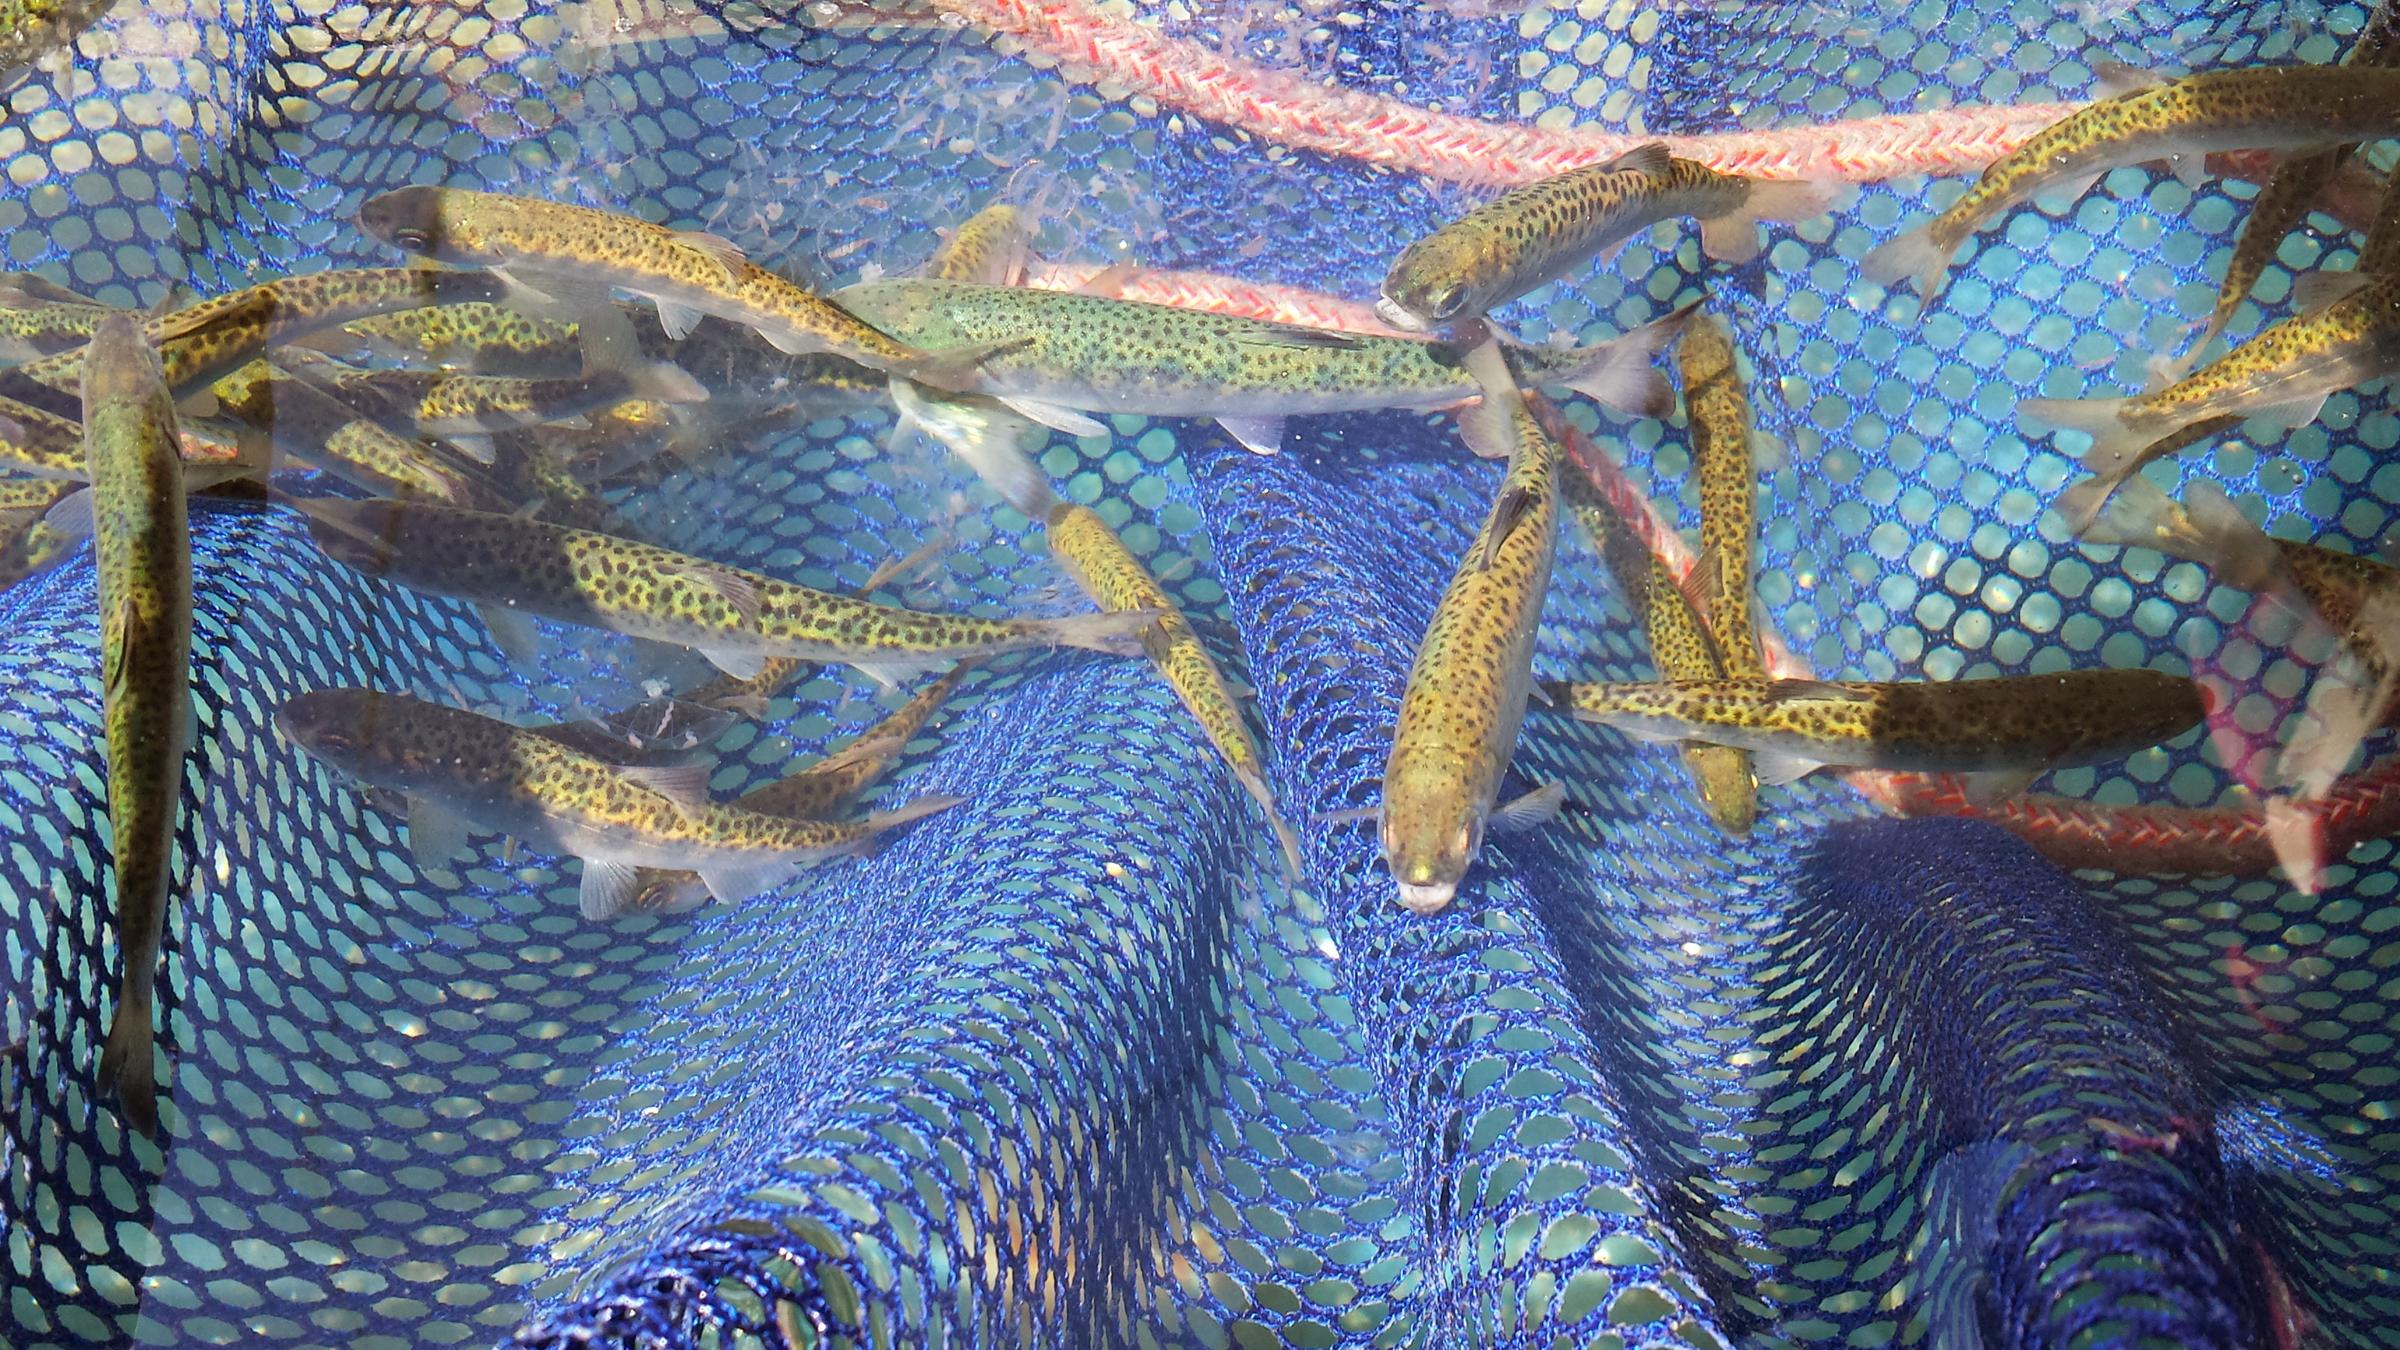 Juvenile salmon captured for sampling and analysis in the Salish Sea Marine Survival Project.